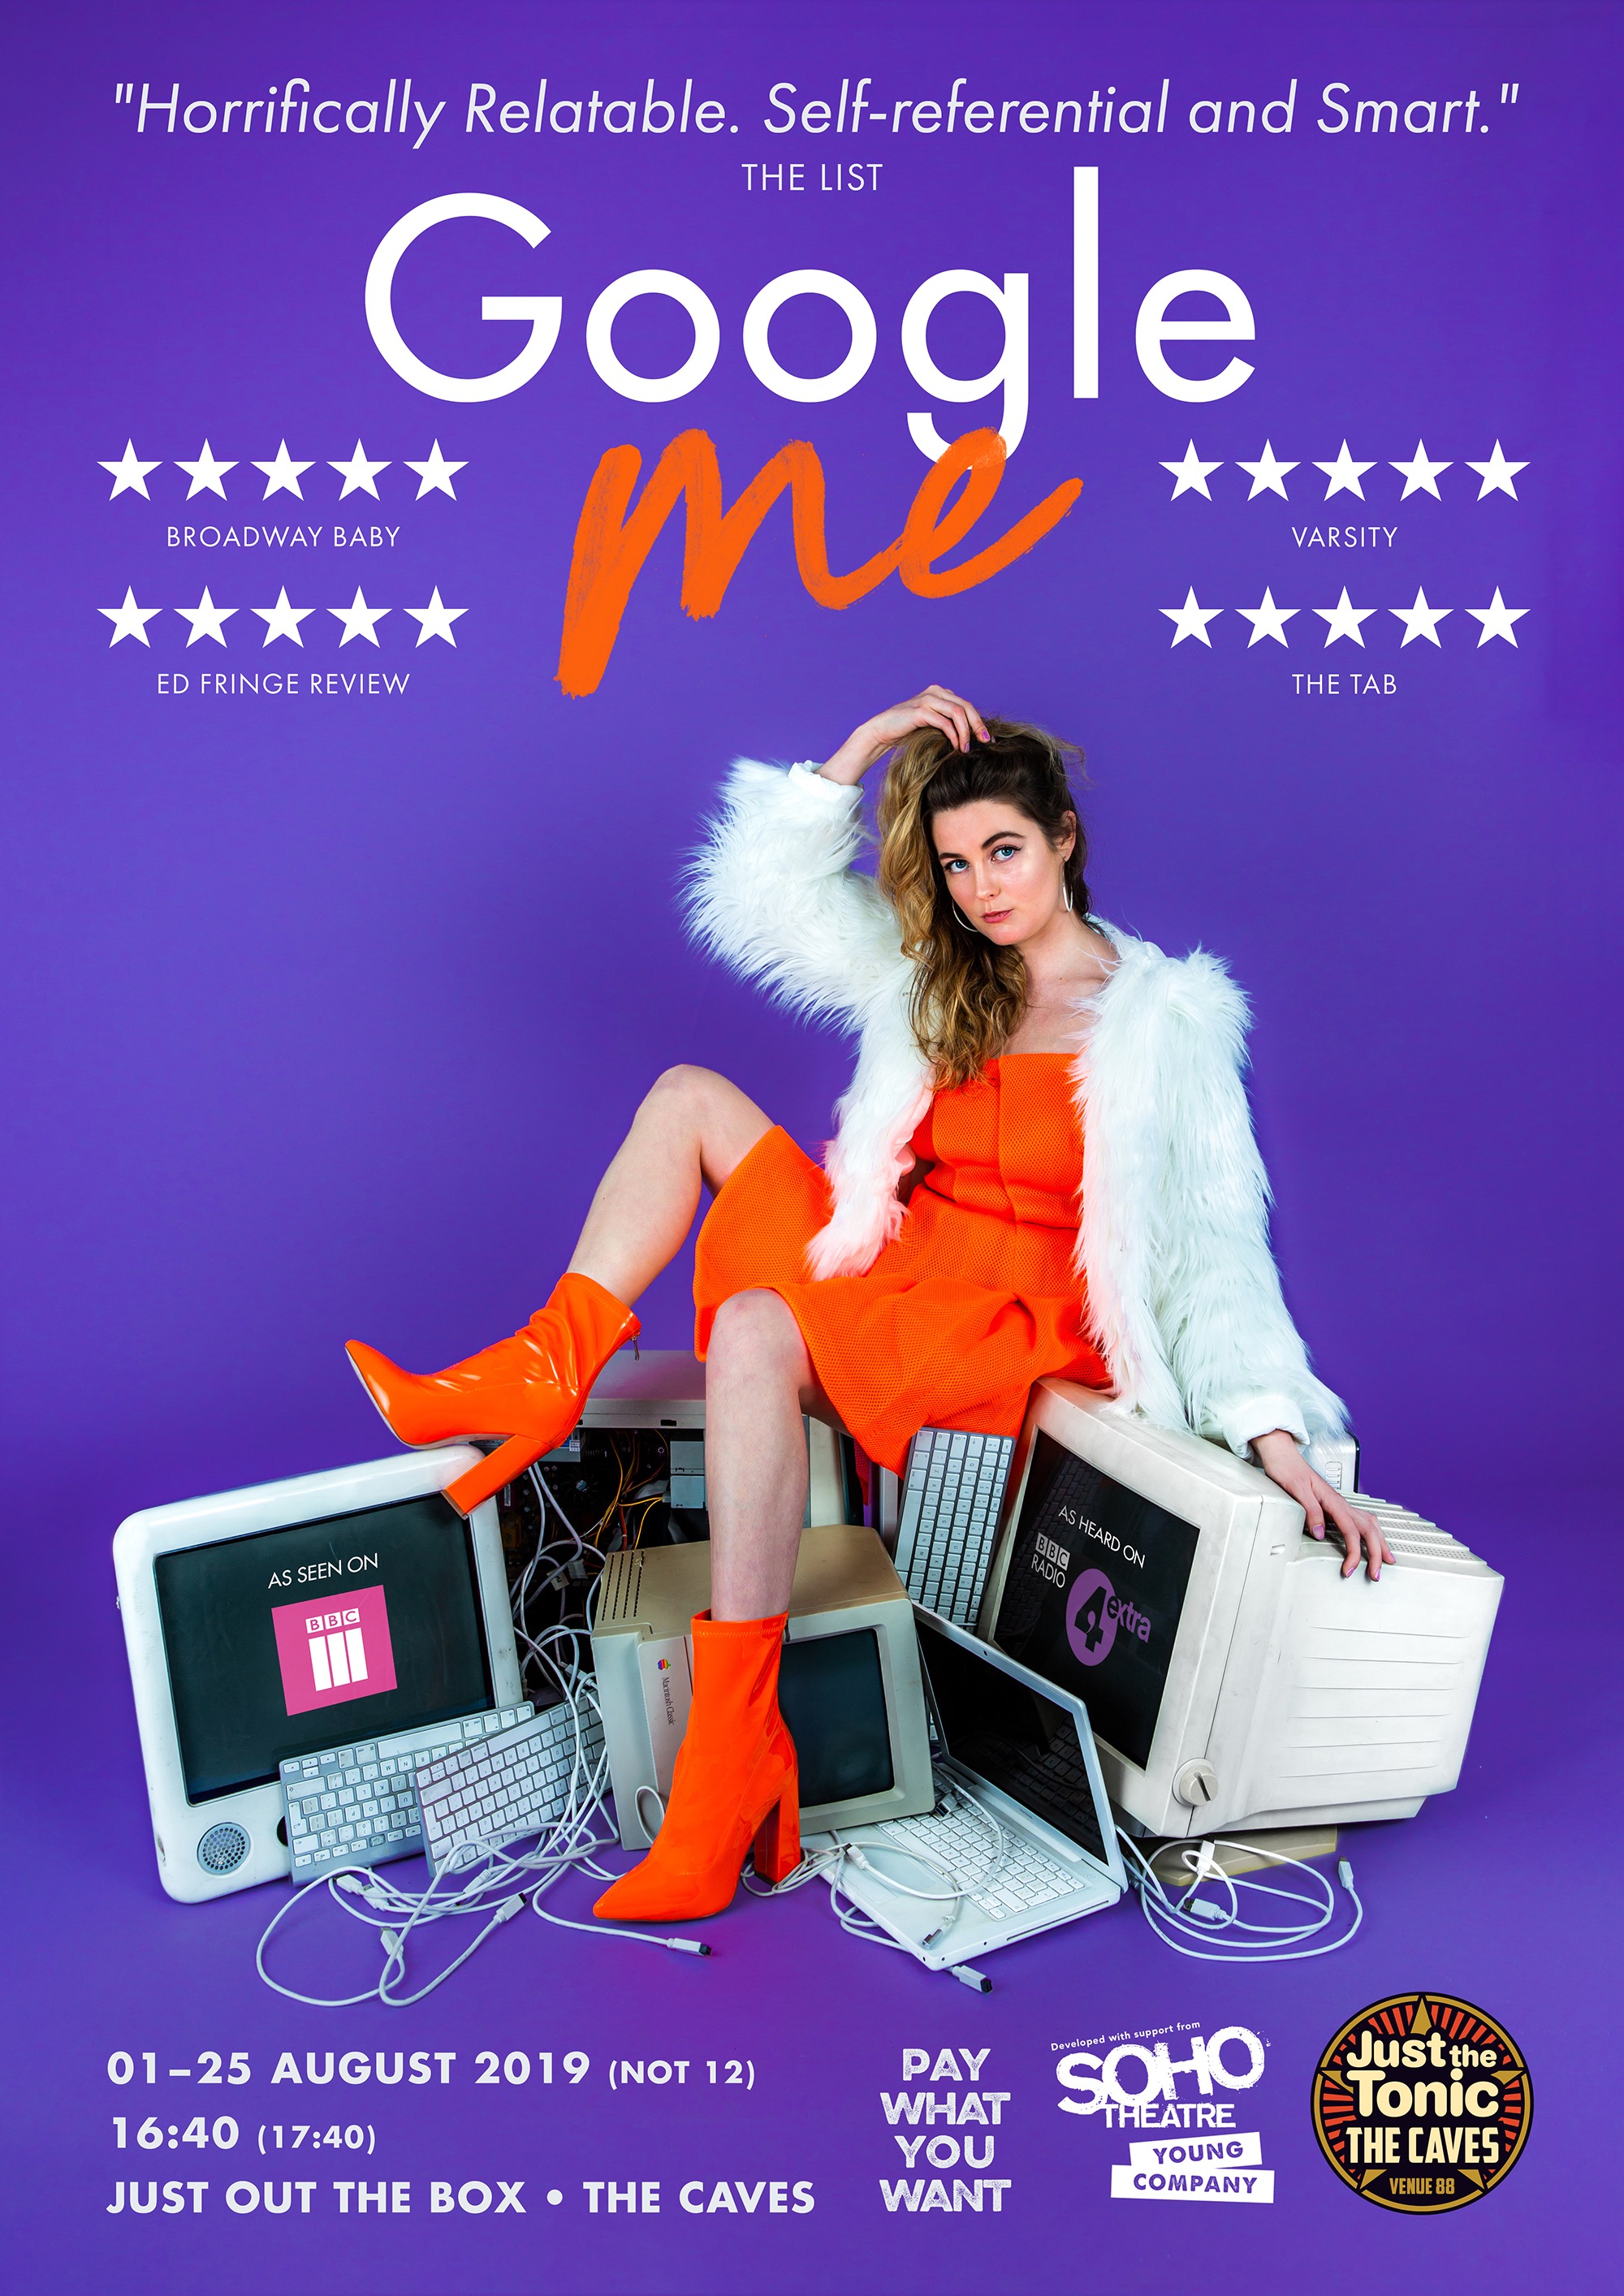 The poster for Google Me